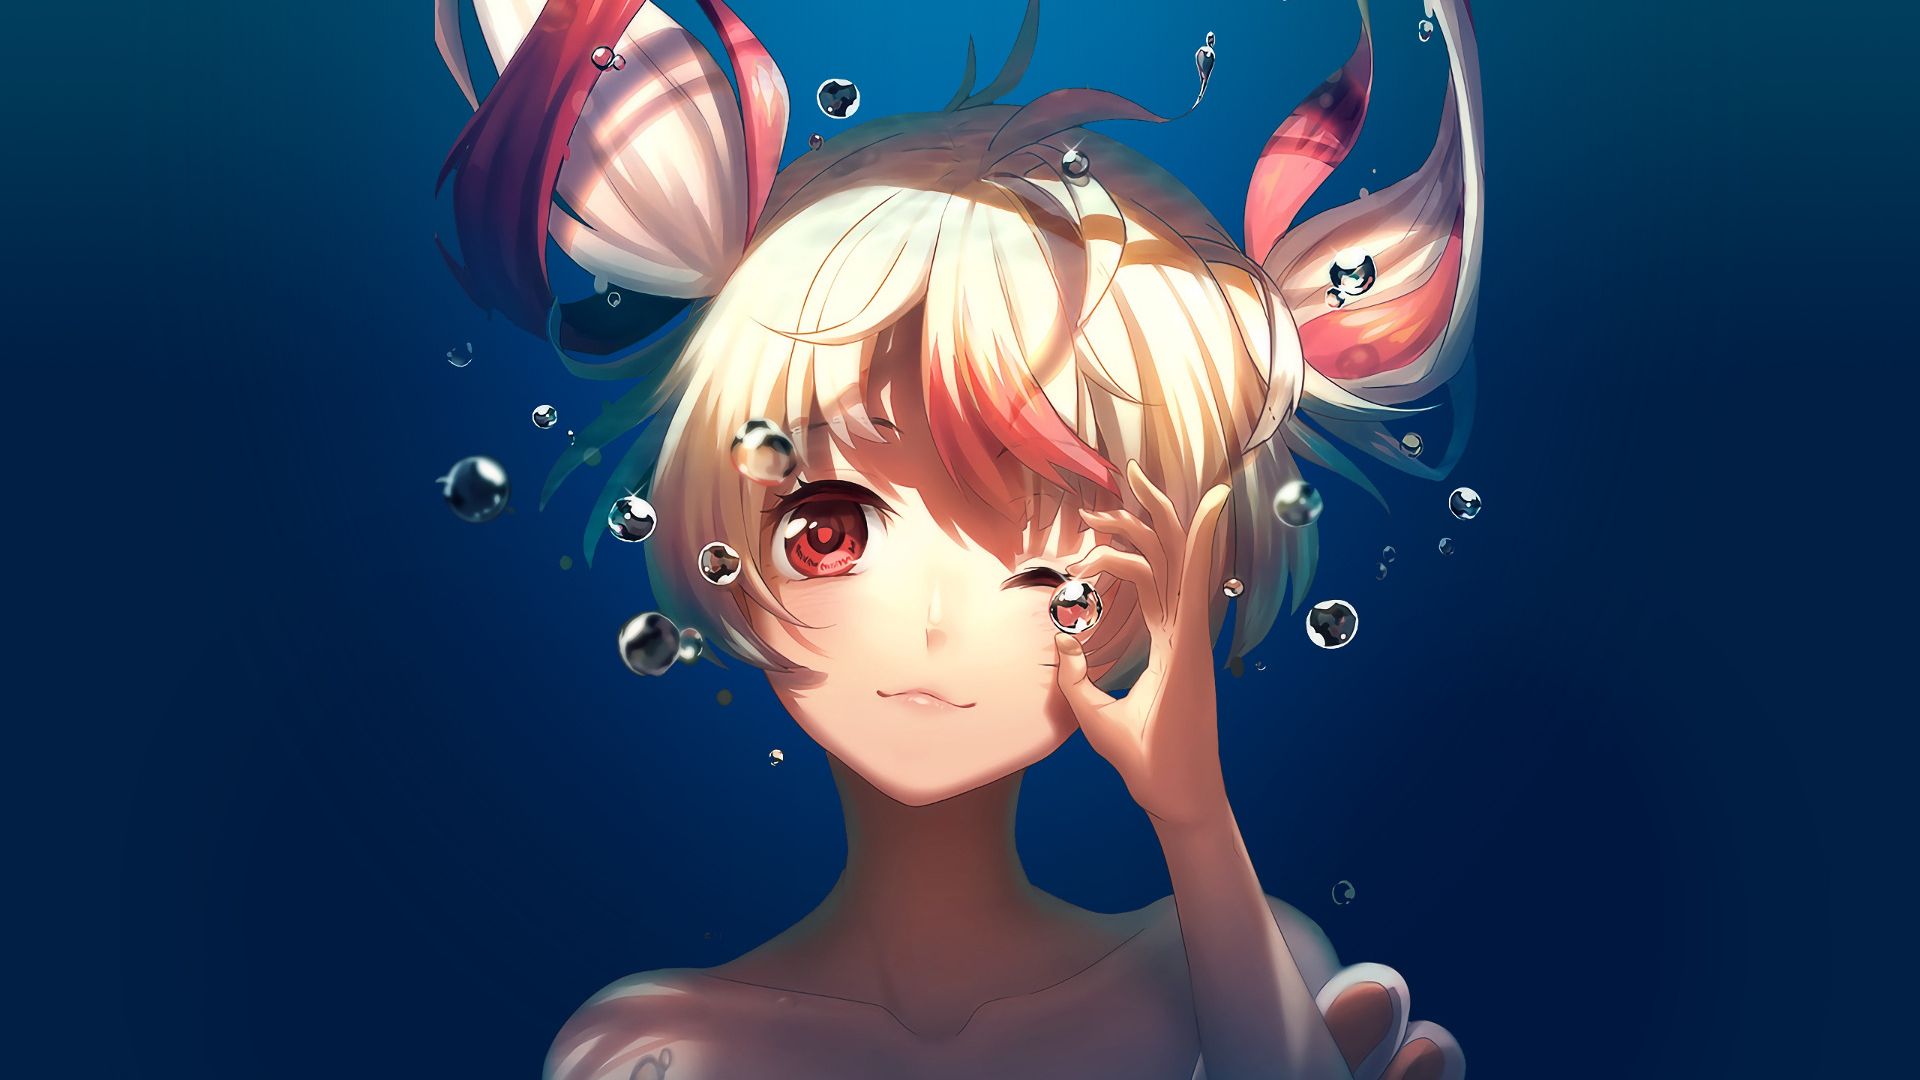 Bubble, Underwater, Cute, Anime Girl, Gonna Be The Twin Tail!! Wallpaper, HD Image, Picture, Background, 8757b9